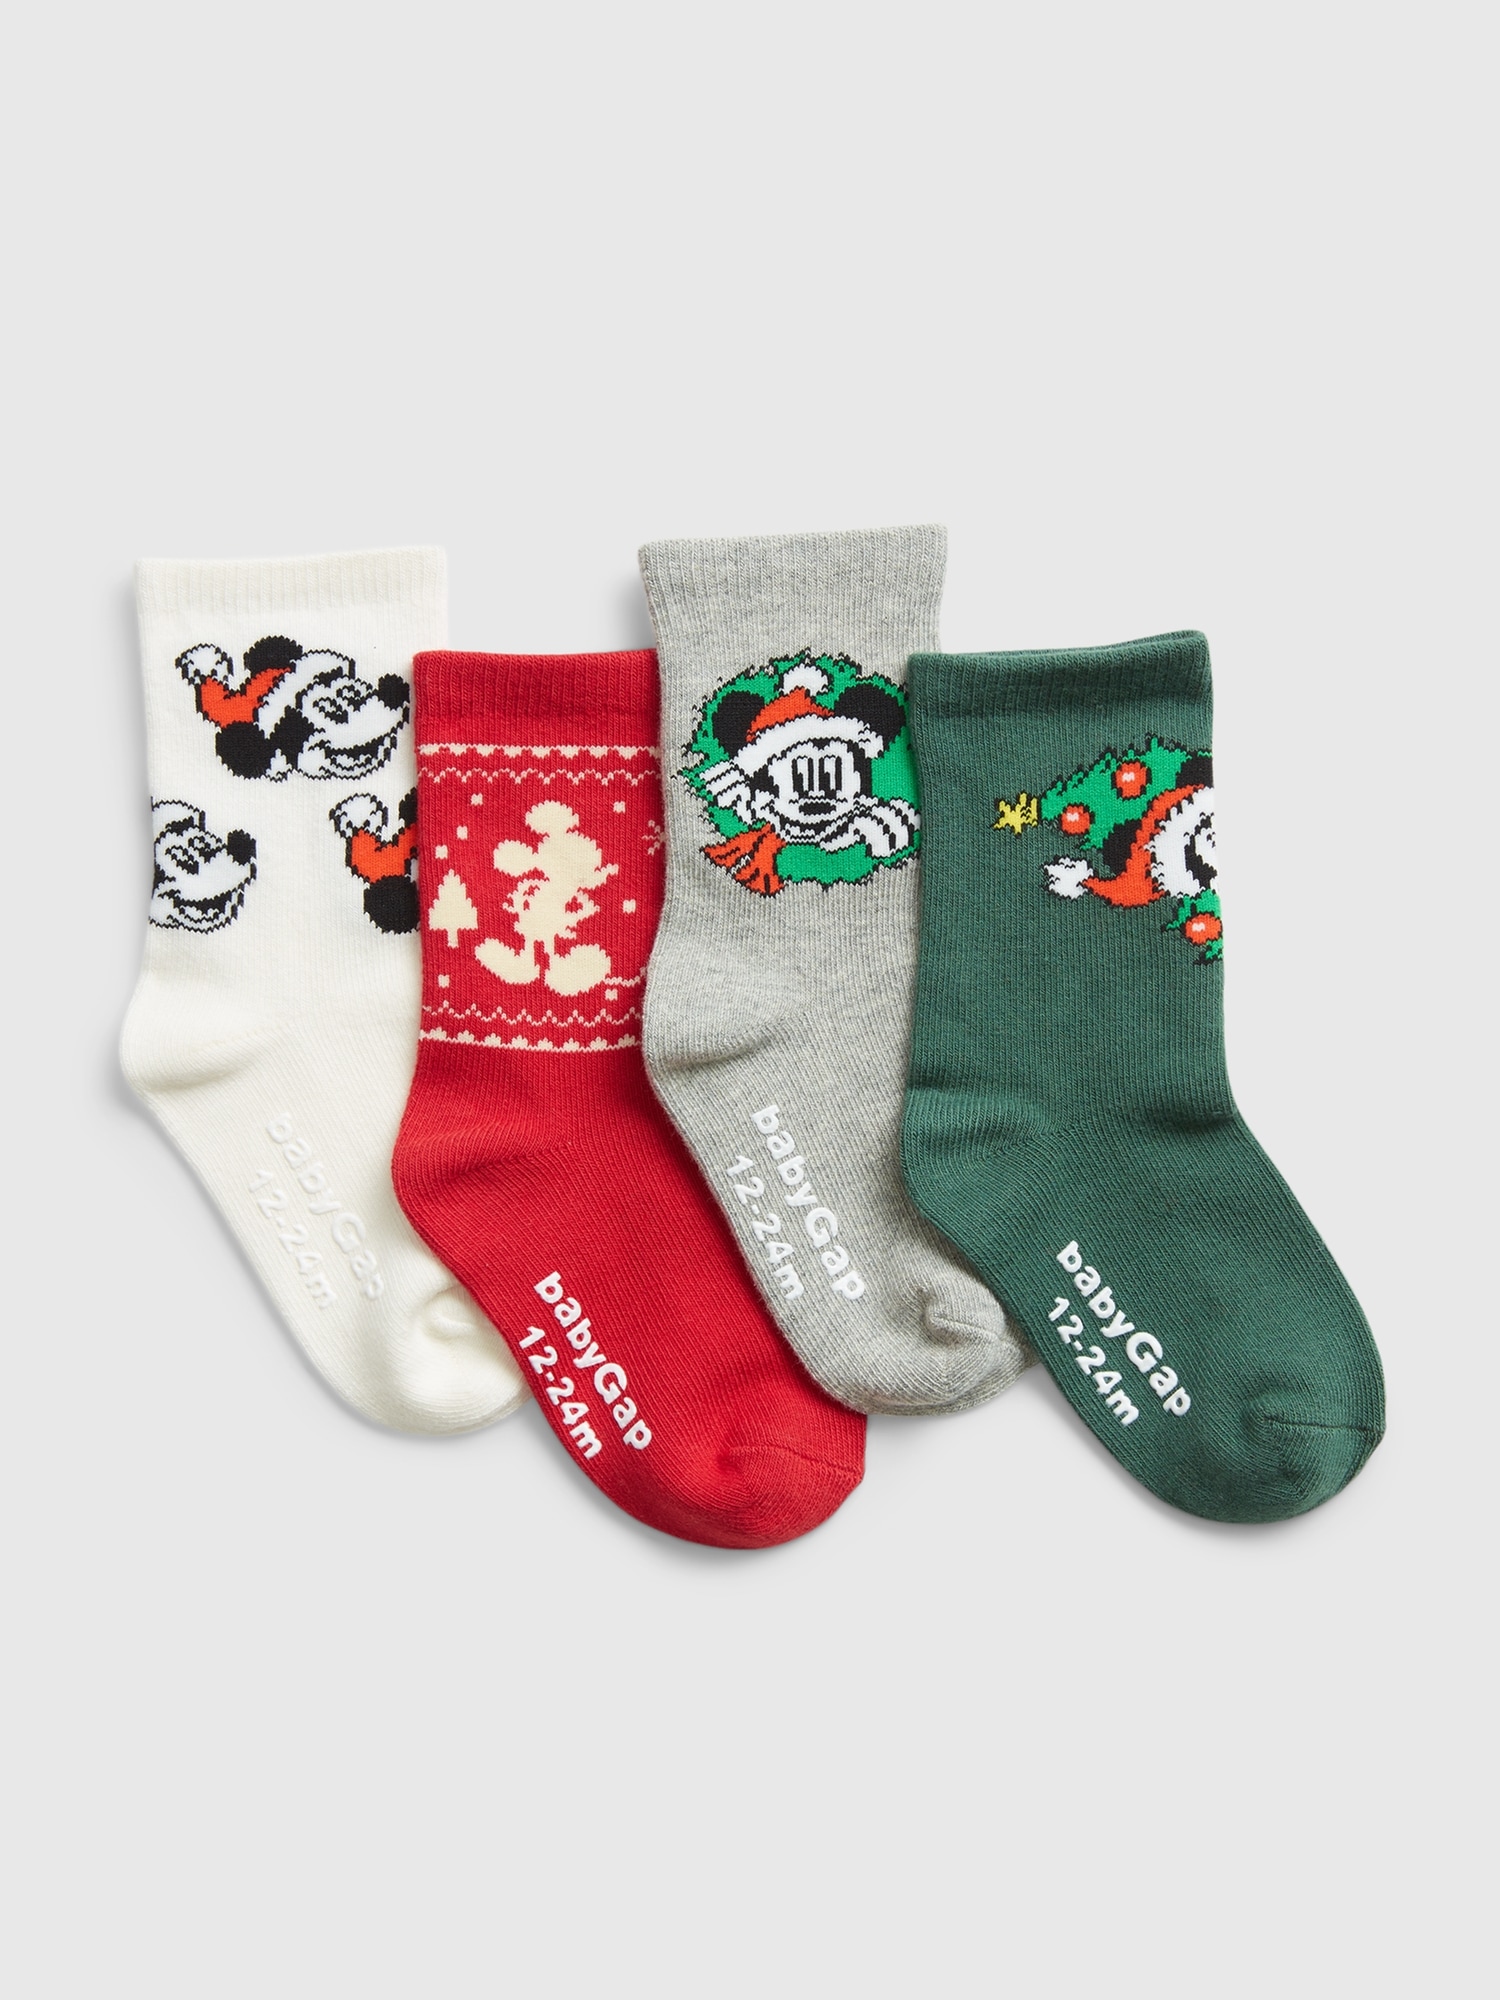 Mickey Mouse Socks That Give Back, Recently, we launched a special  collection of Disney Princess socks inspired by the courage of kindness.  Now, we've brought Mickey Mouse, Donald Duck